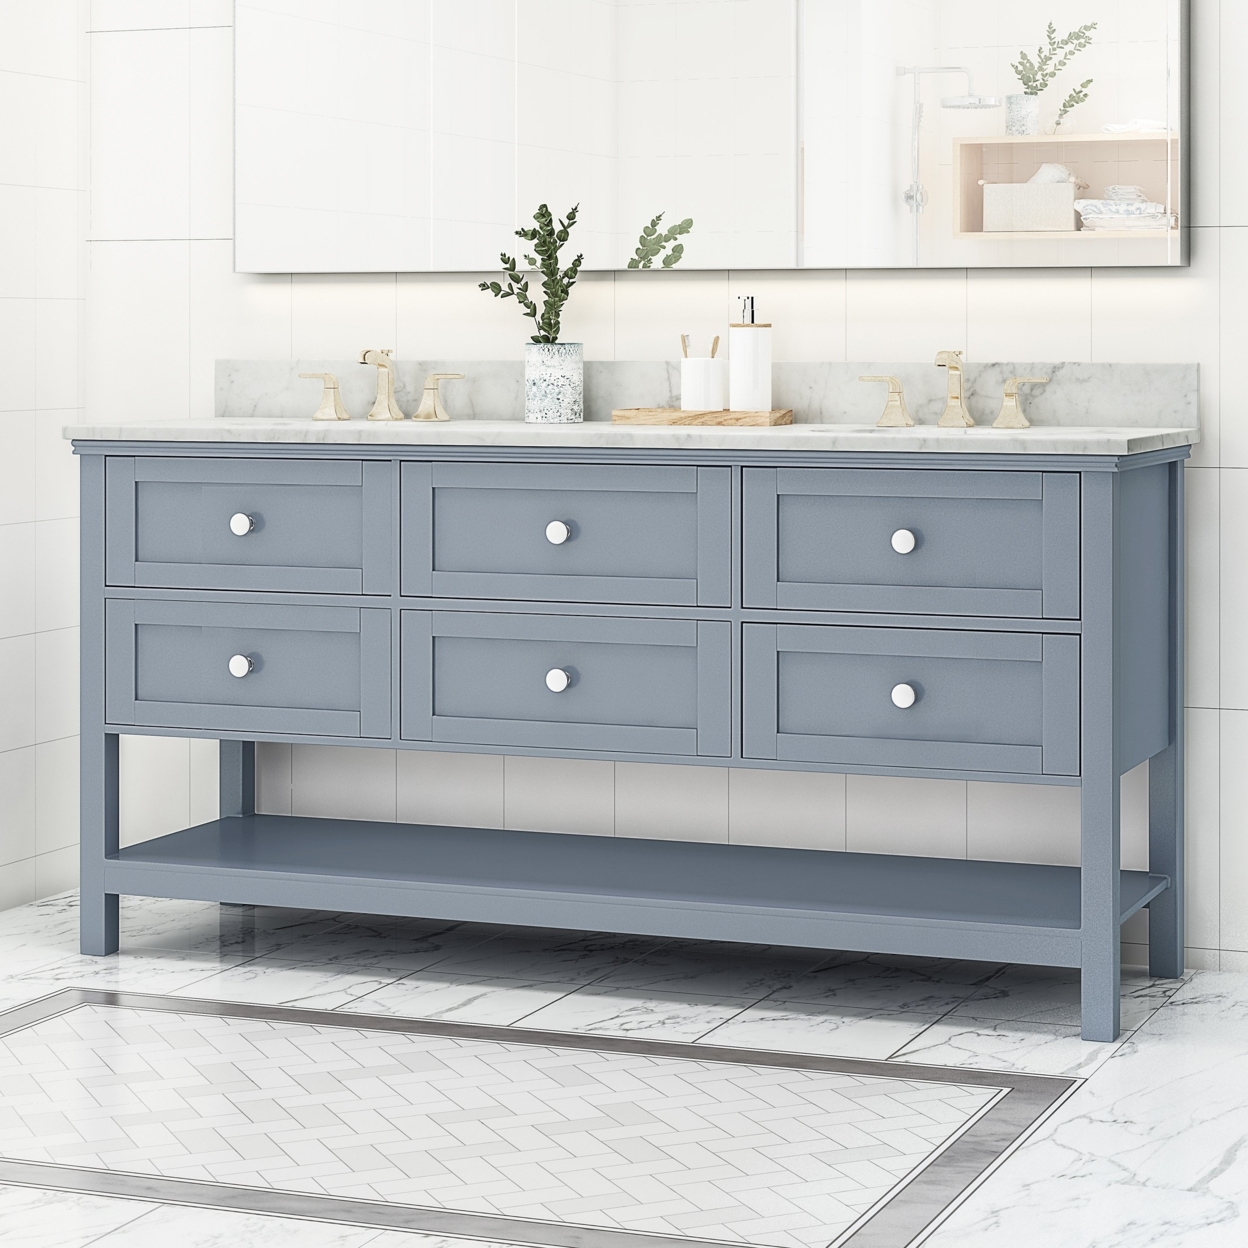 Douvier Contemporary 72 Wood Double Sink Bathroom Vanity With Marble Counter Top With Carrara White Marble - Gray